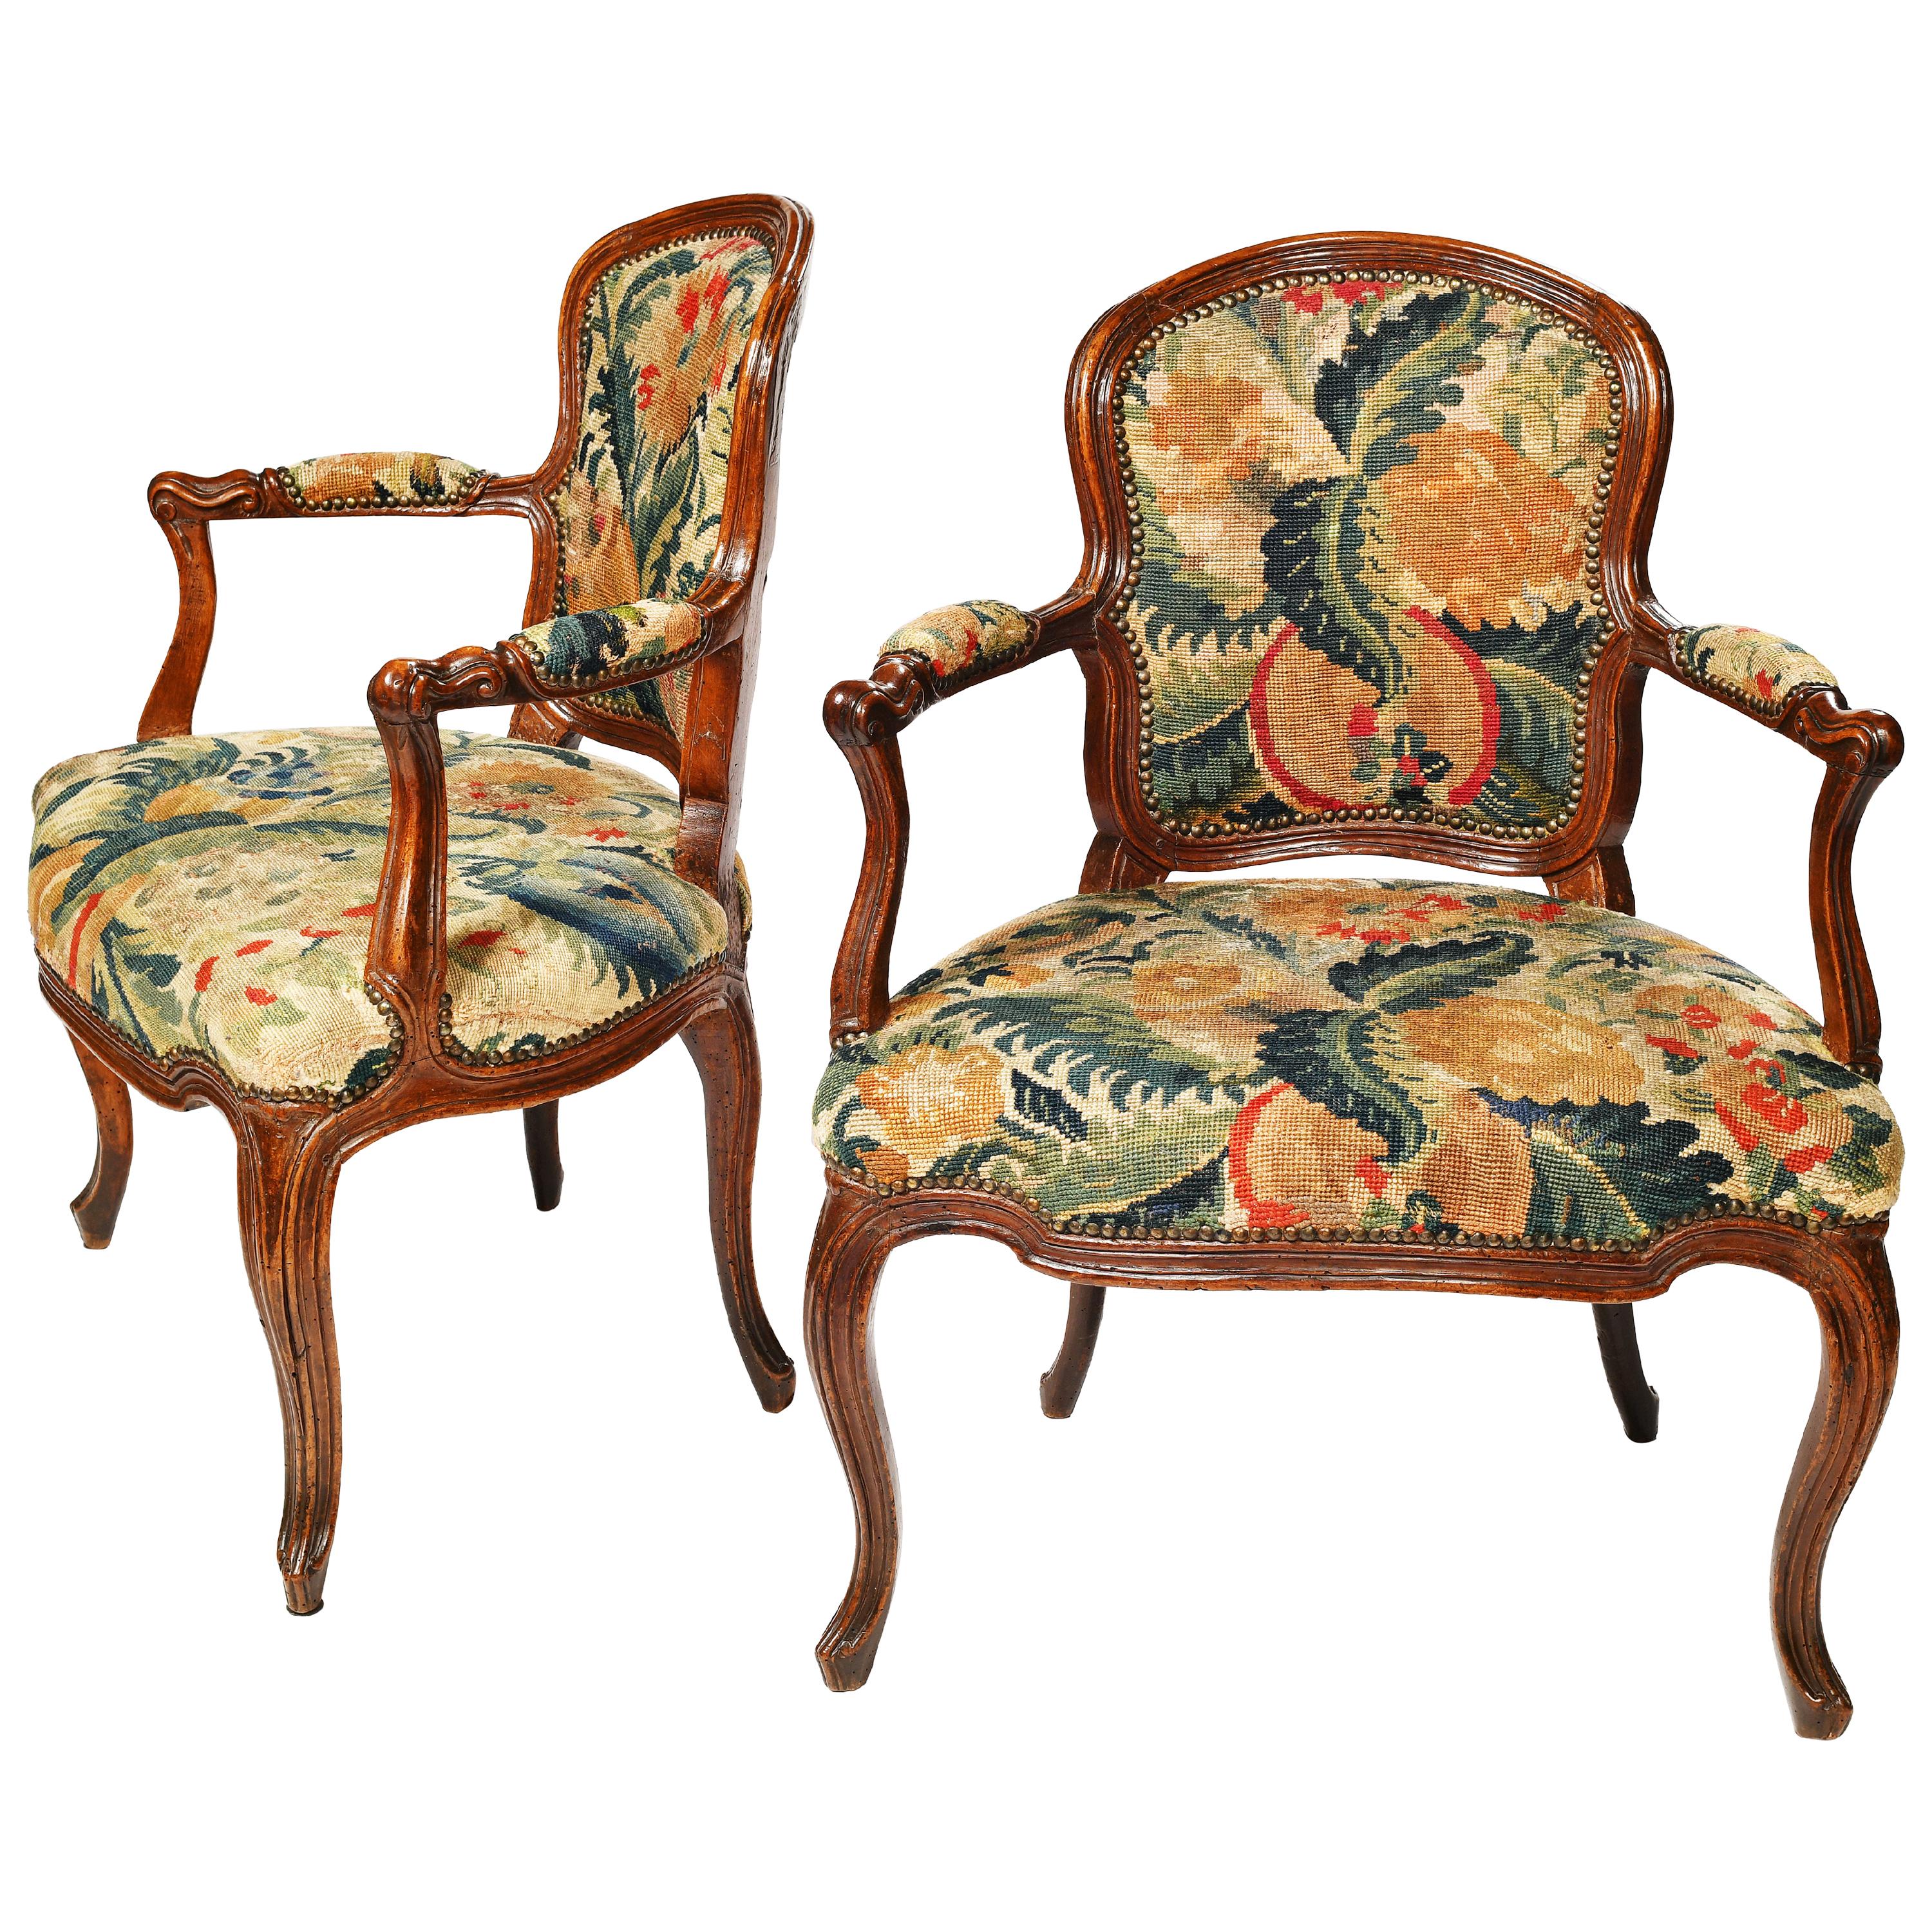 Ancient Italian Pair of Armchairs in “Petit Point” Embroidery, Turin Circa 1750 